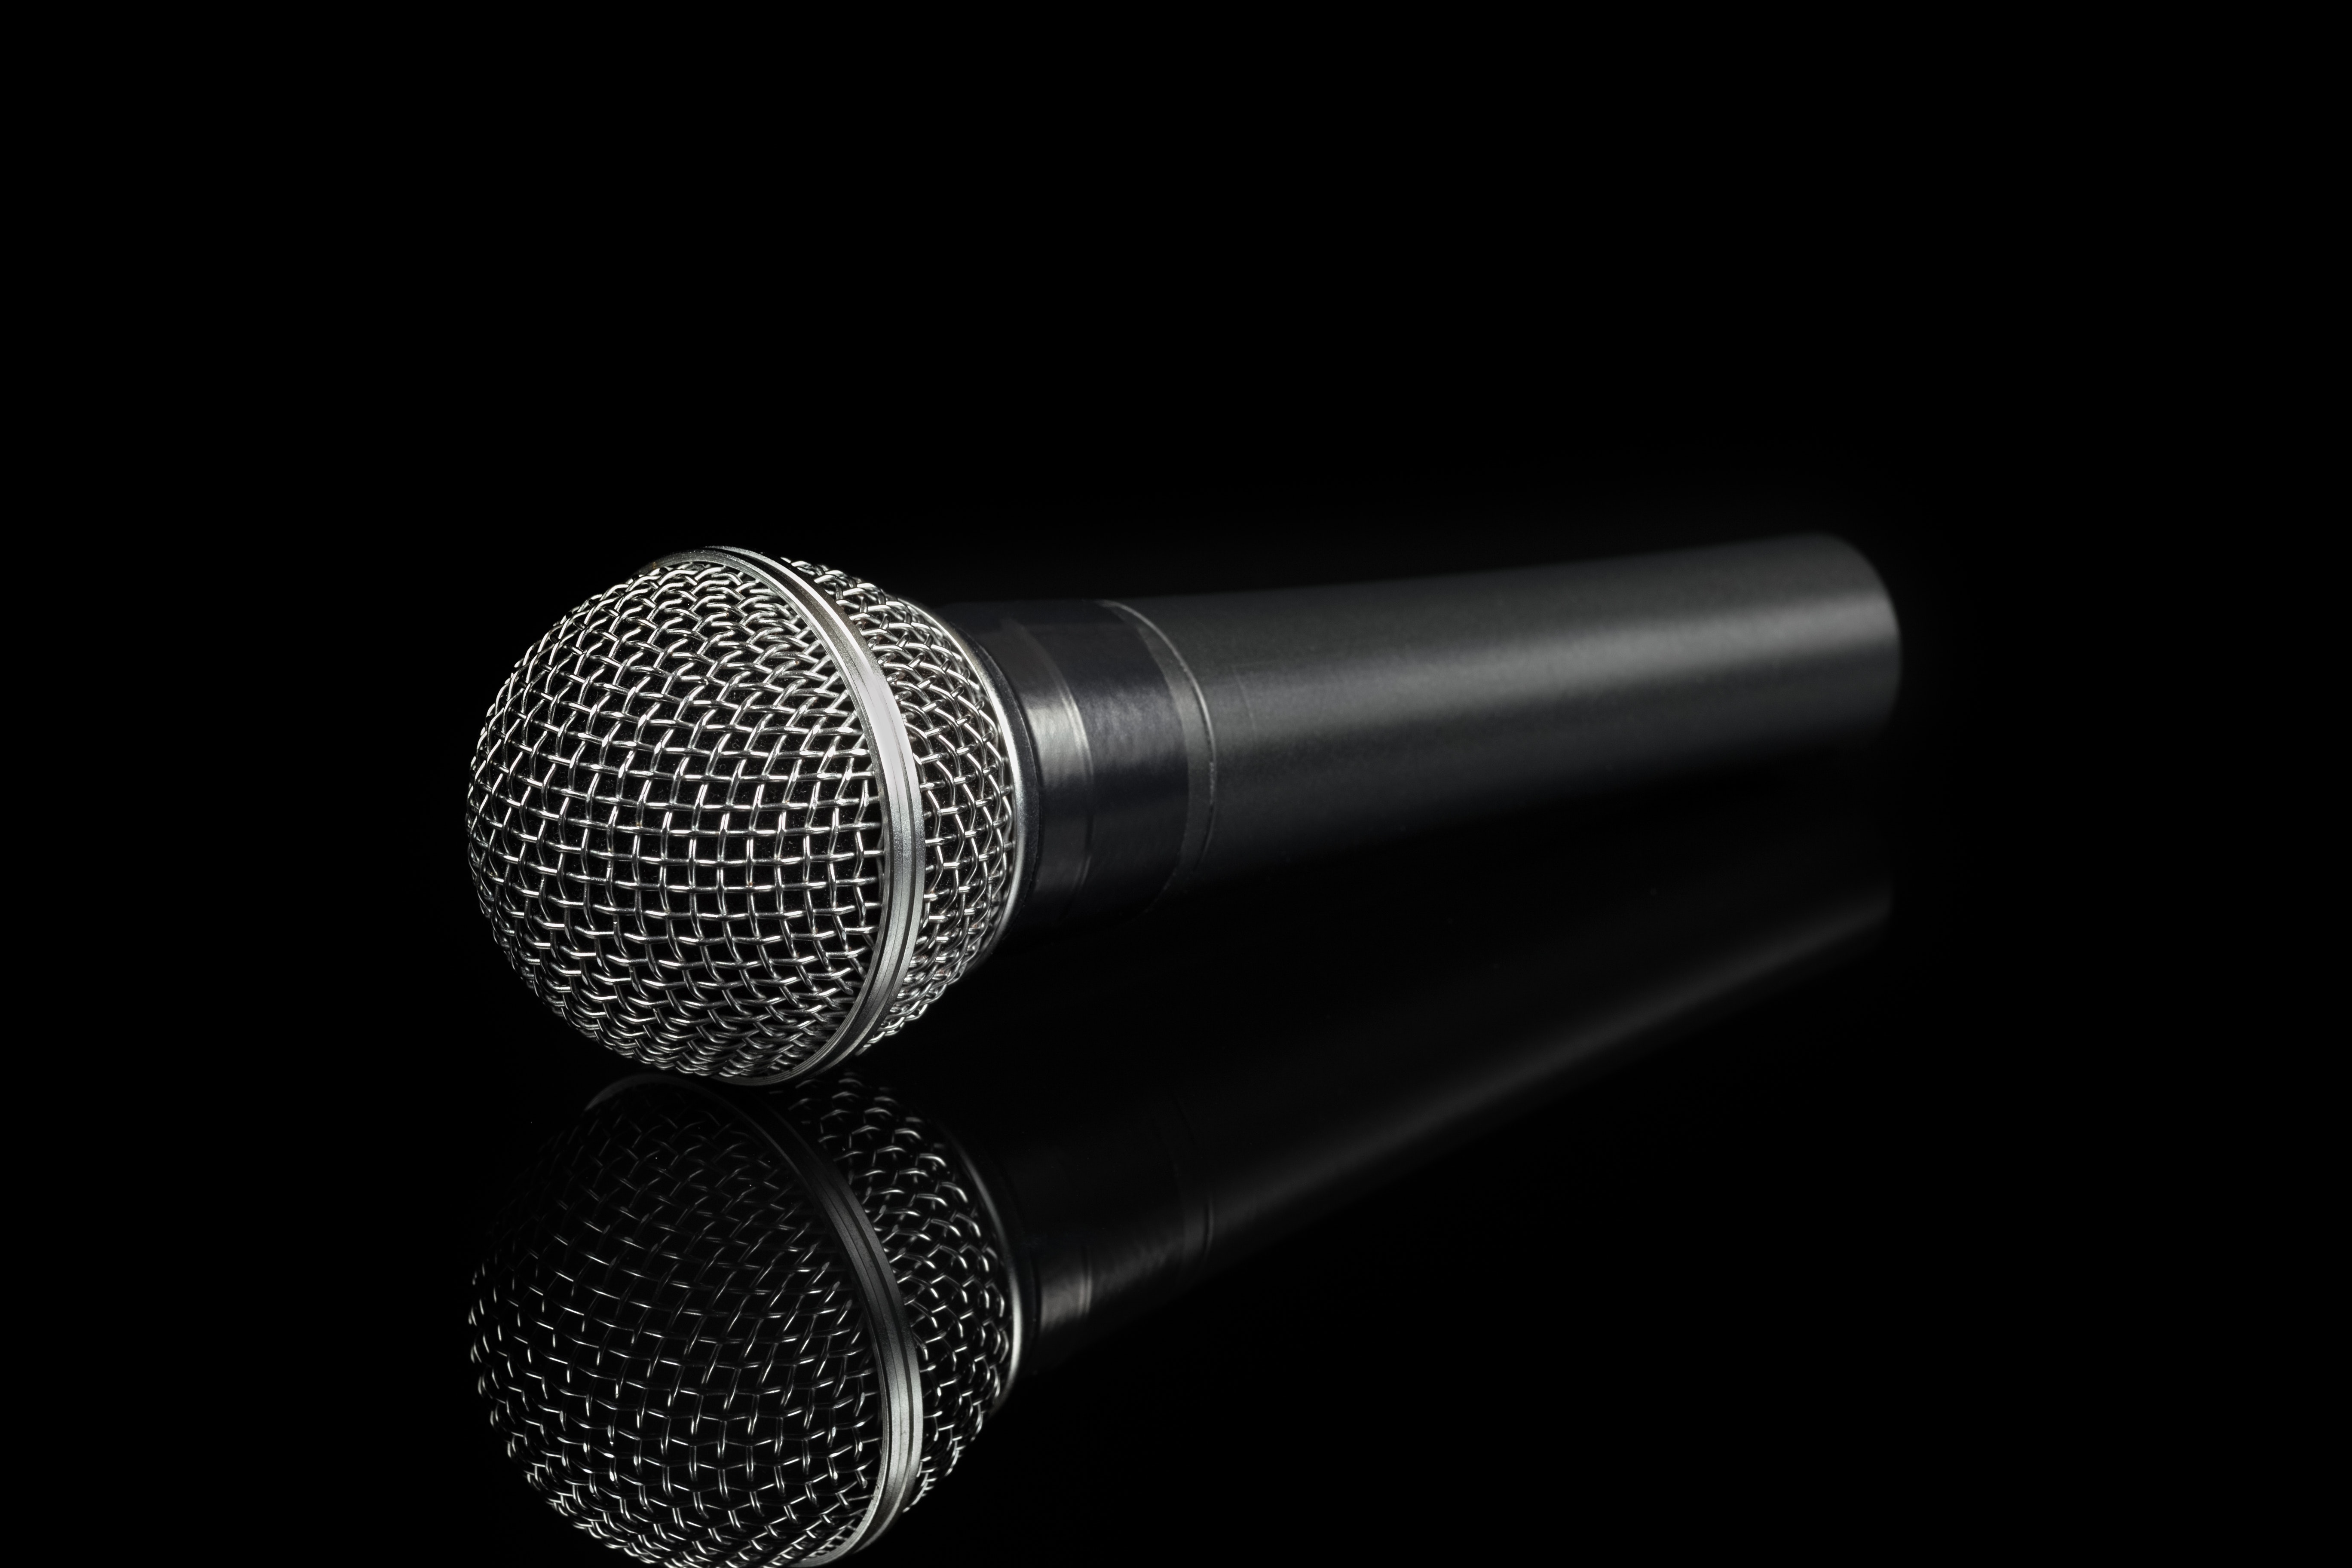 black-and-gray-dynamic-microphone-on-reflective-surface-3531975.jpg